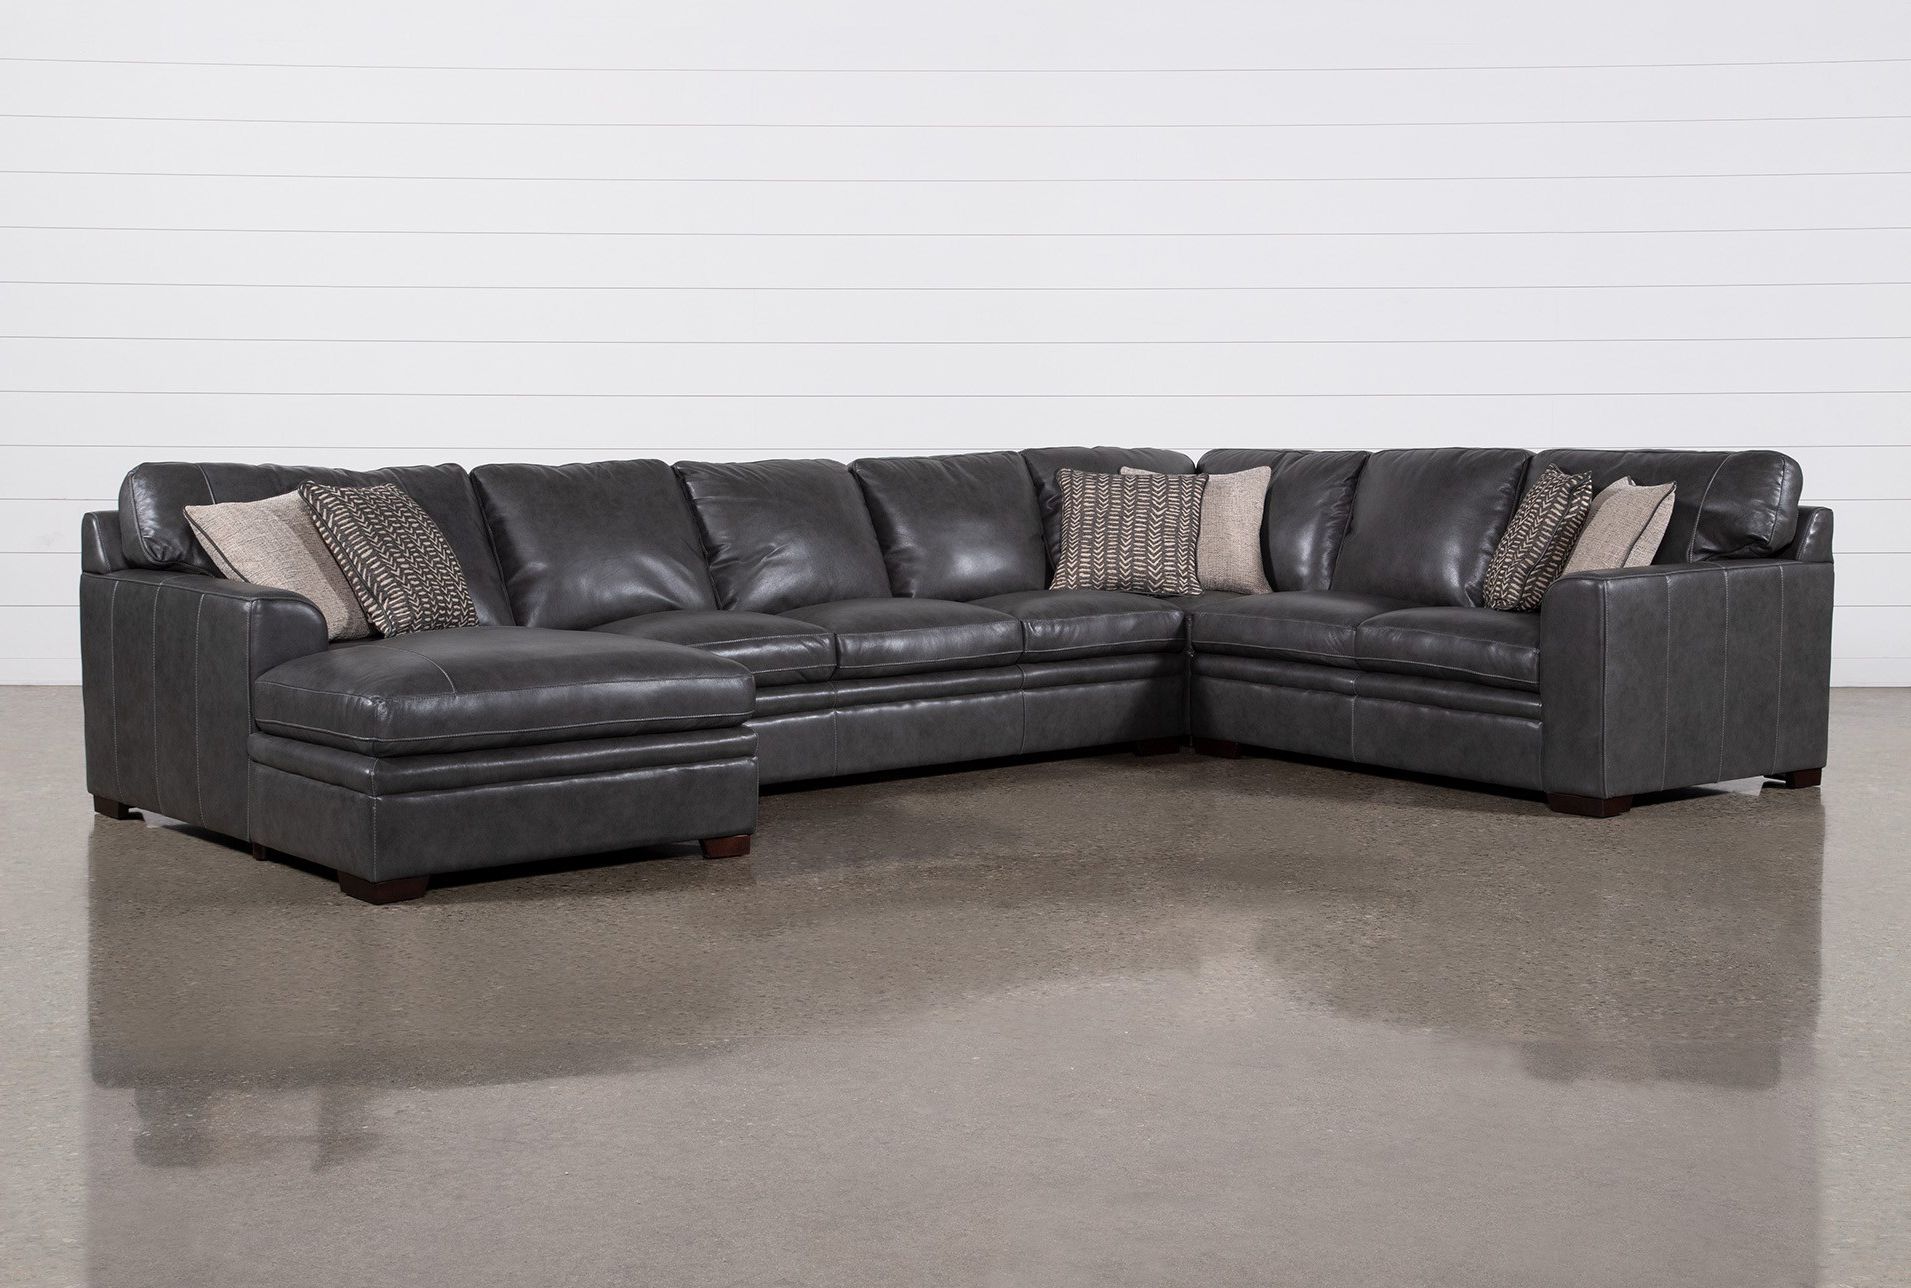 Greer Dark Grey Leather 4 Piece 166" Modular Sectional With Left Arm Regarding Dark Gray Sectional Sofas (Gallery 10 of 20)